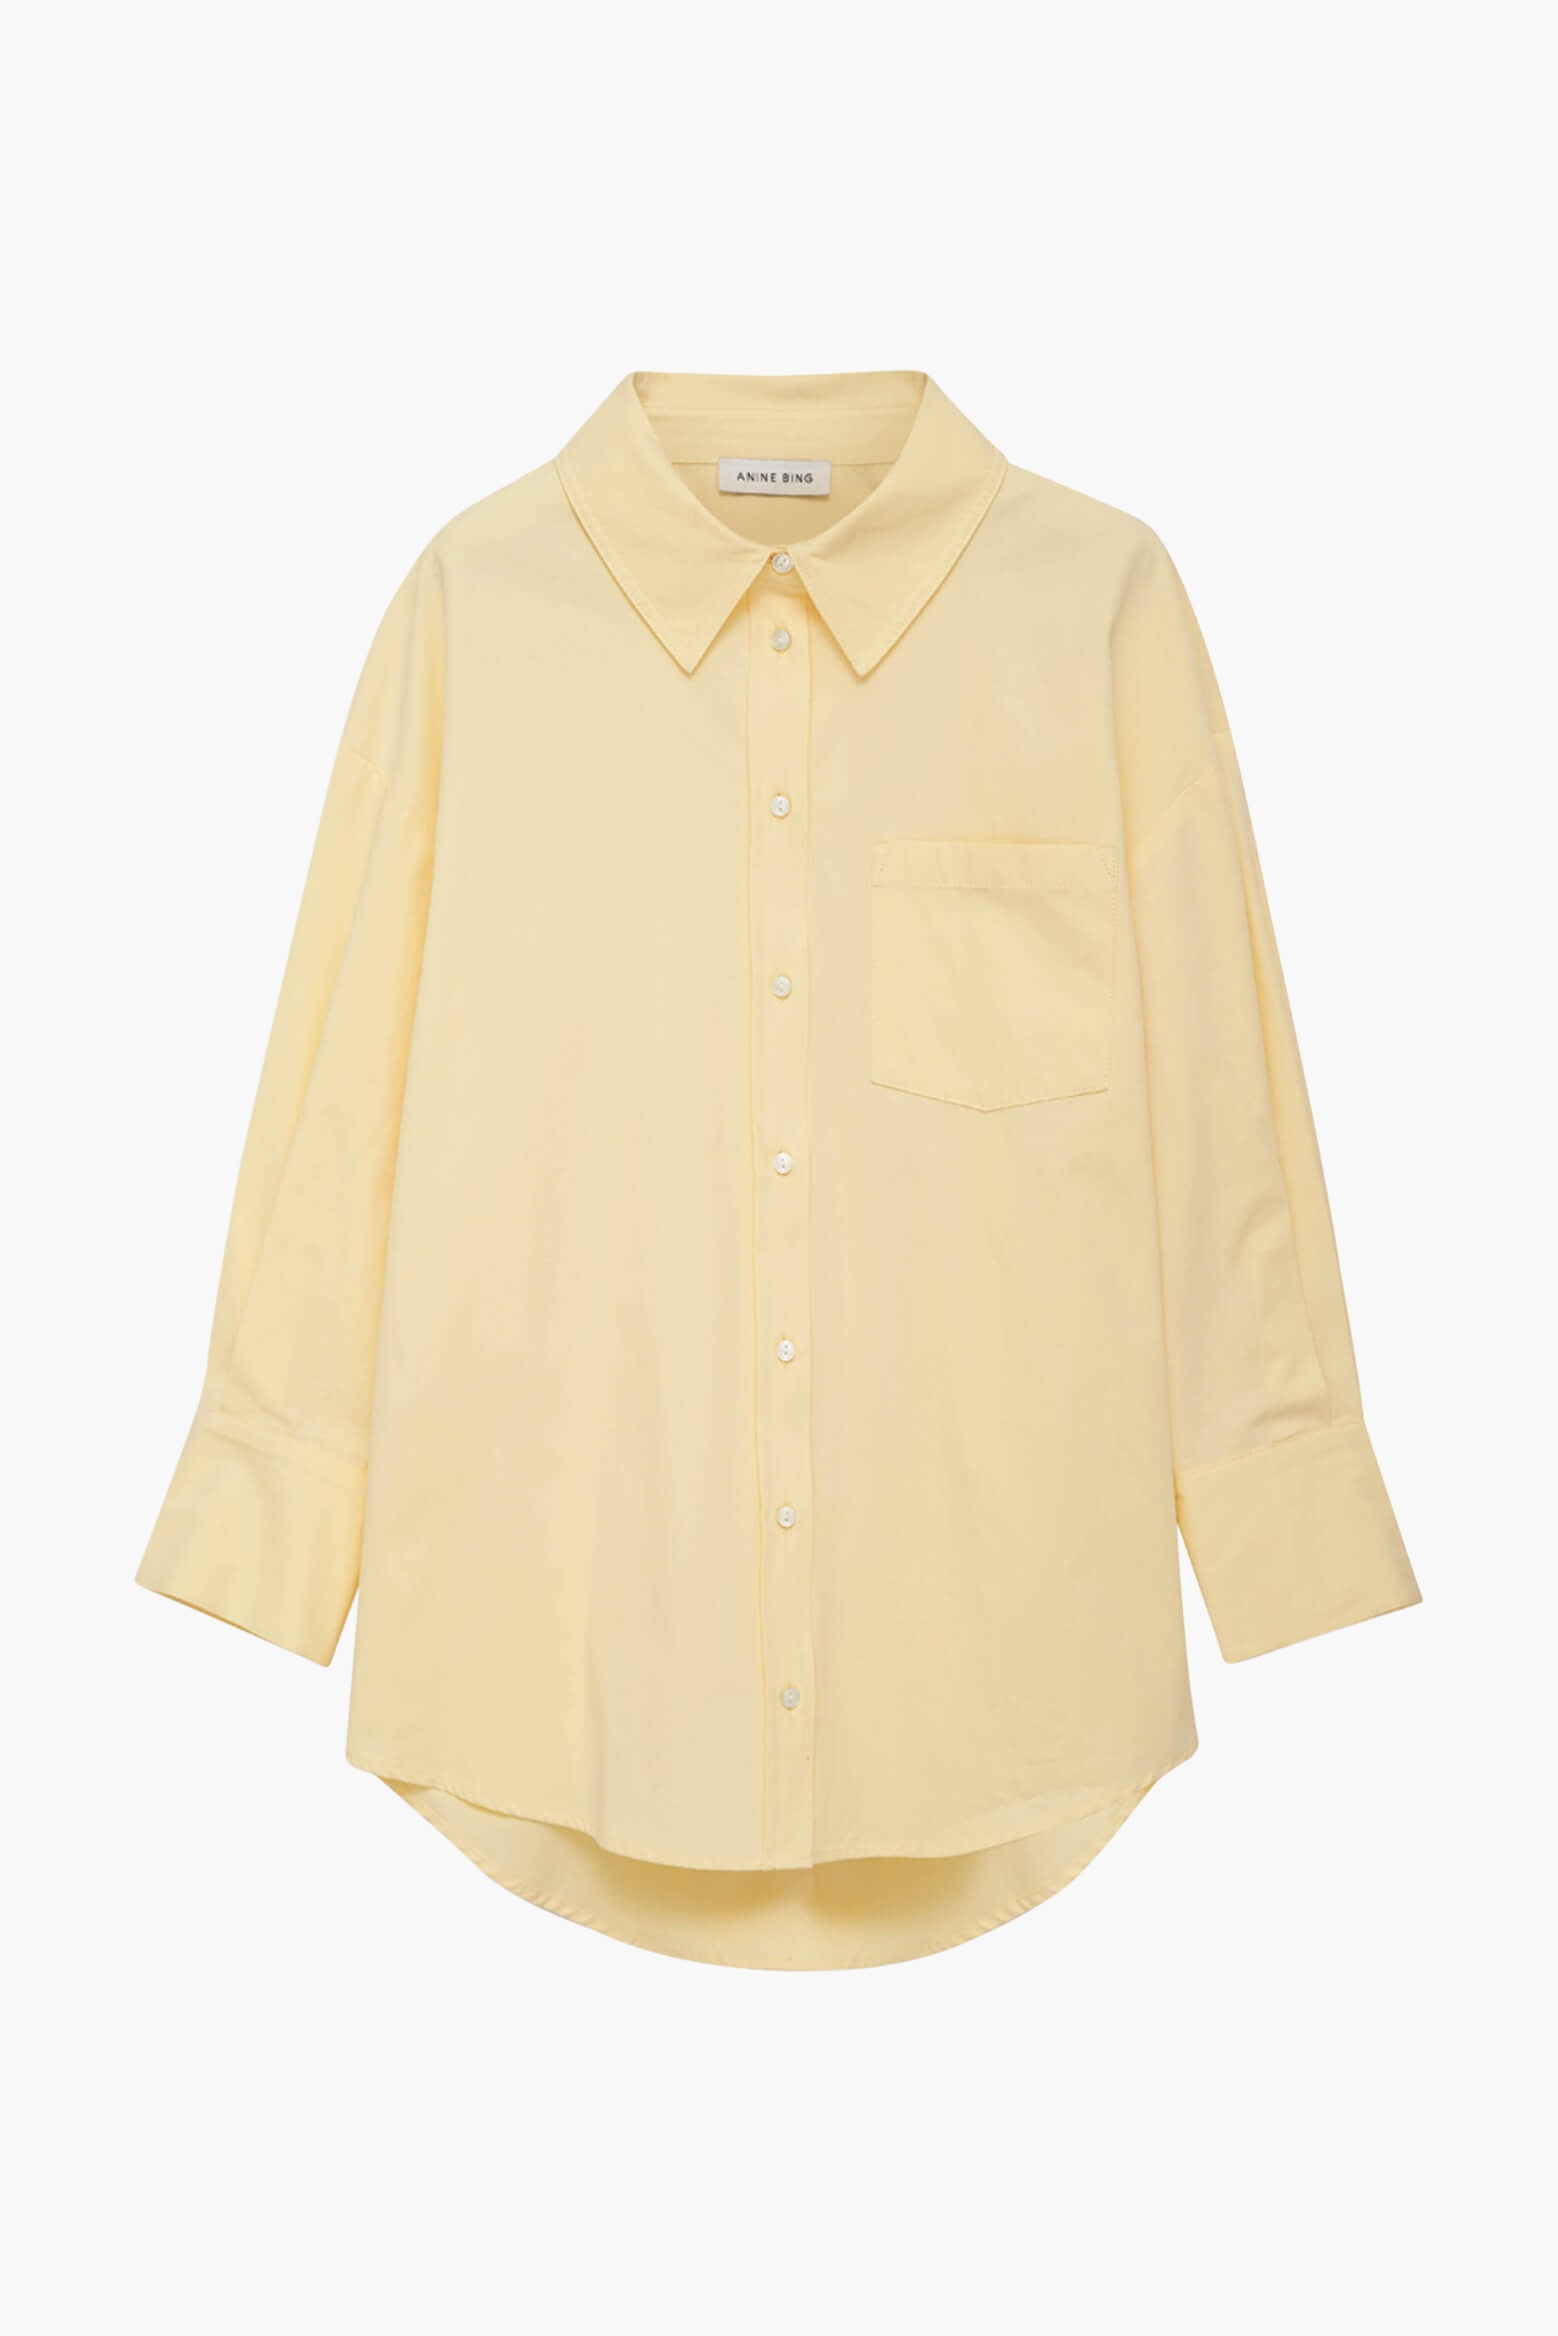 Anine Bing Mika Shirt in Yellow available at TNT The New Trend Australia.